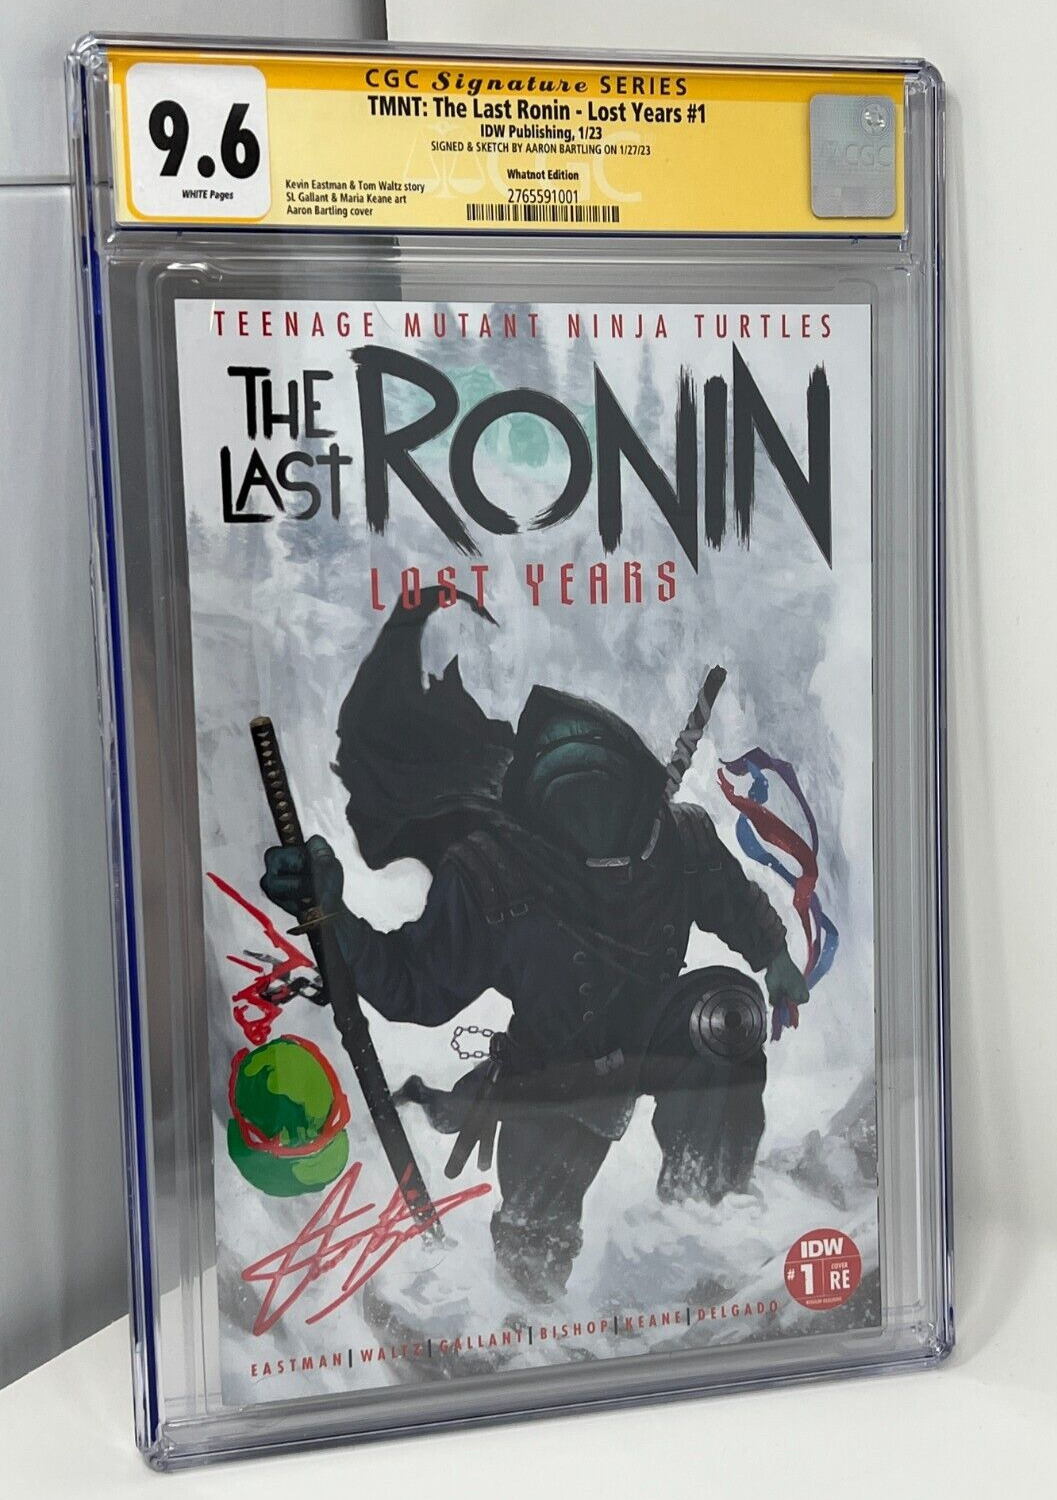 TMNT The Last Ronin Lost Years #1 Aaron Bartling Cover Signed & Remarked CGC 9.6